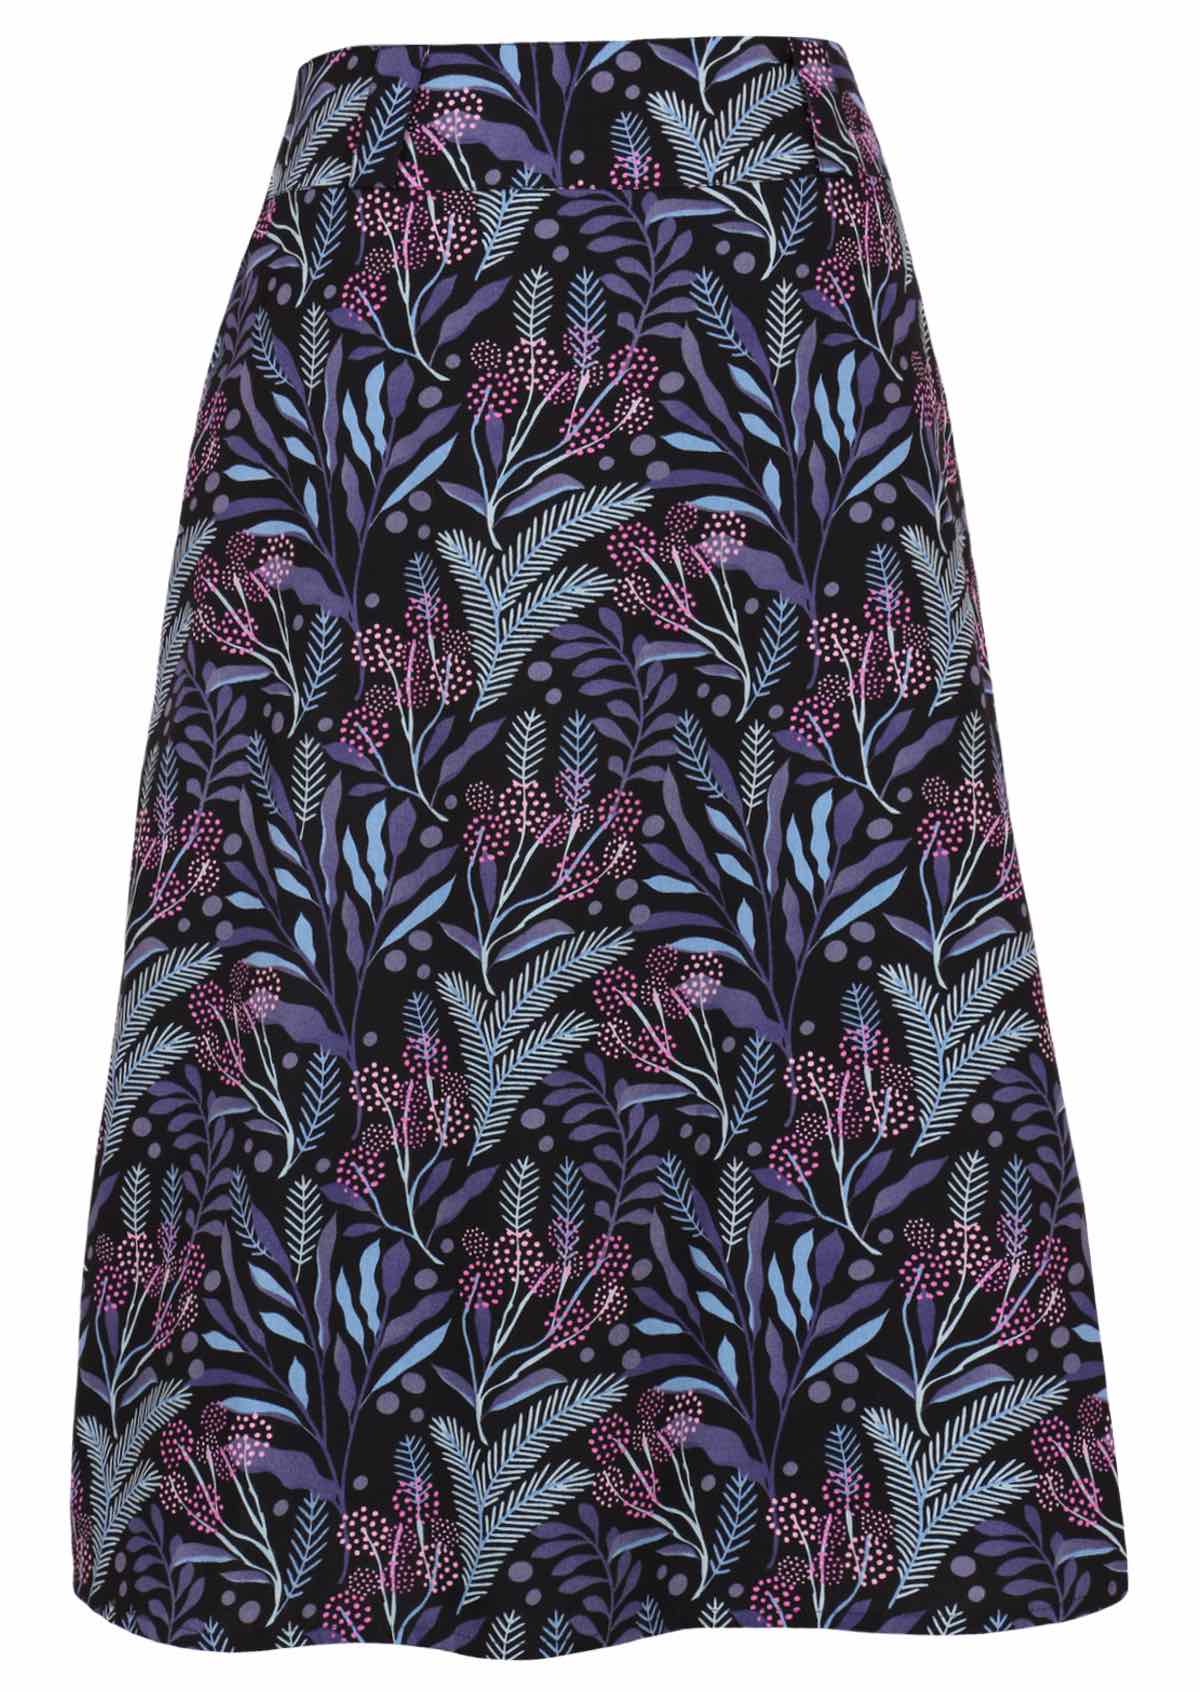 Cotton skirt with black base botanical print in blues and pinks